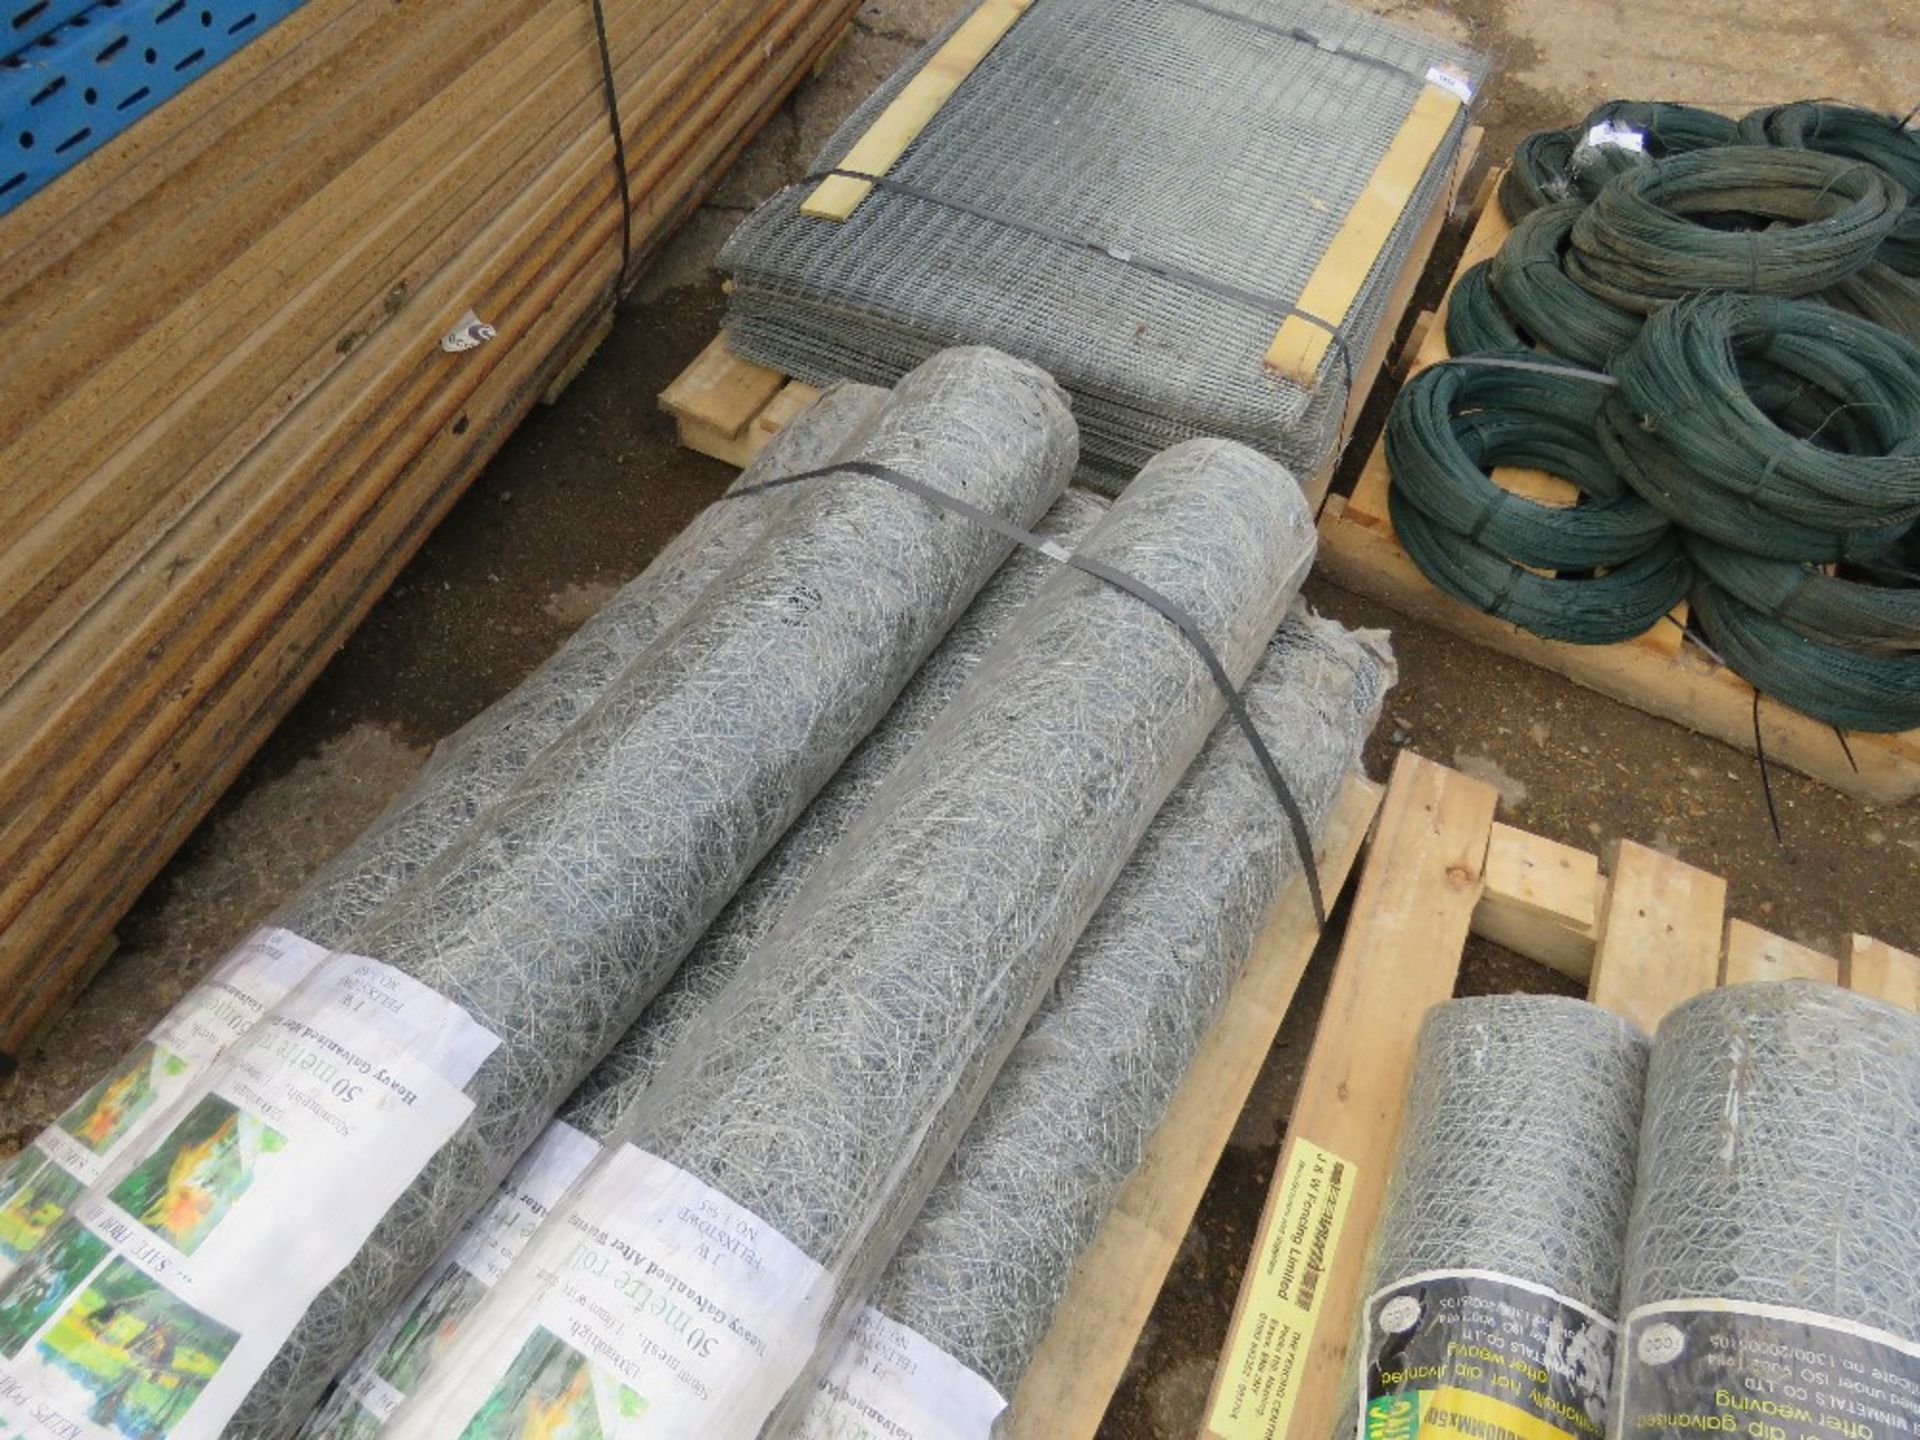 5 X ROLLS OF 1200MM HEIGHT WIRE NETTING, 50M ROLLS. - Image 3 of 3